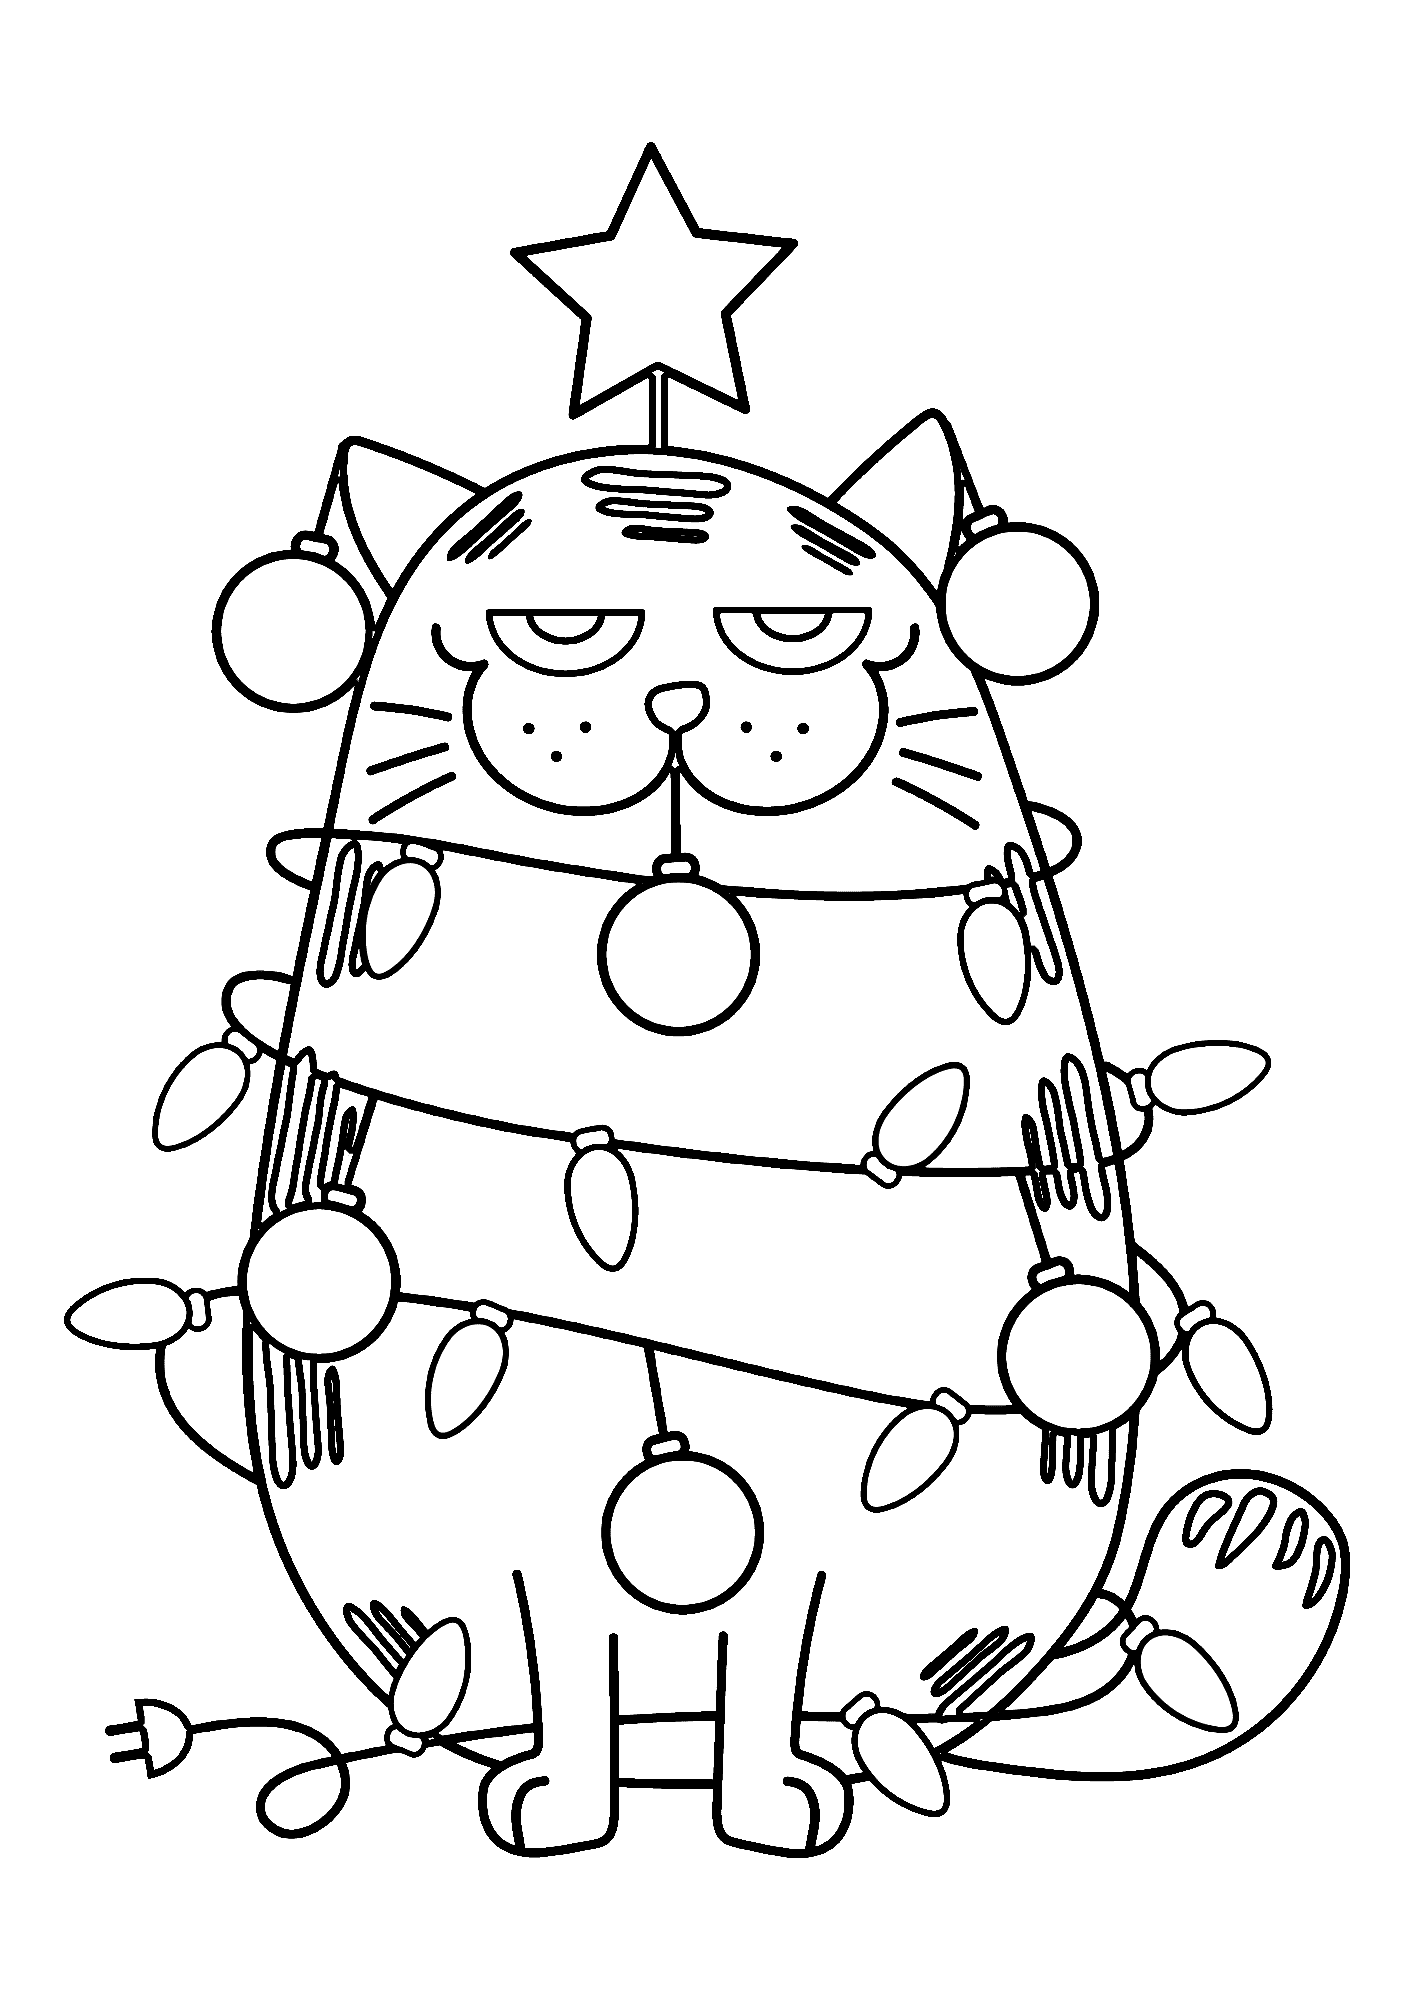 Easy Christmas Tree Coloring Page